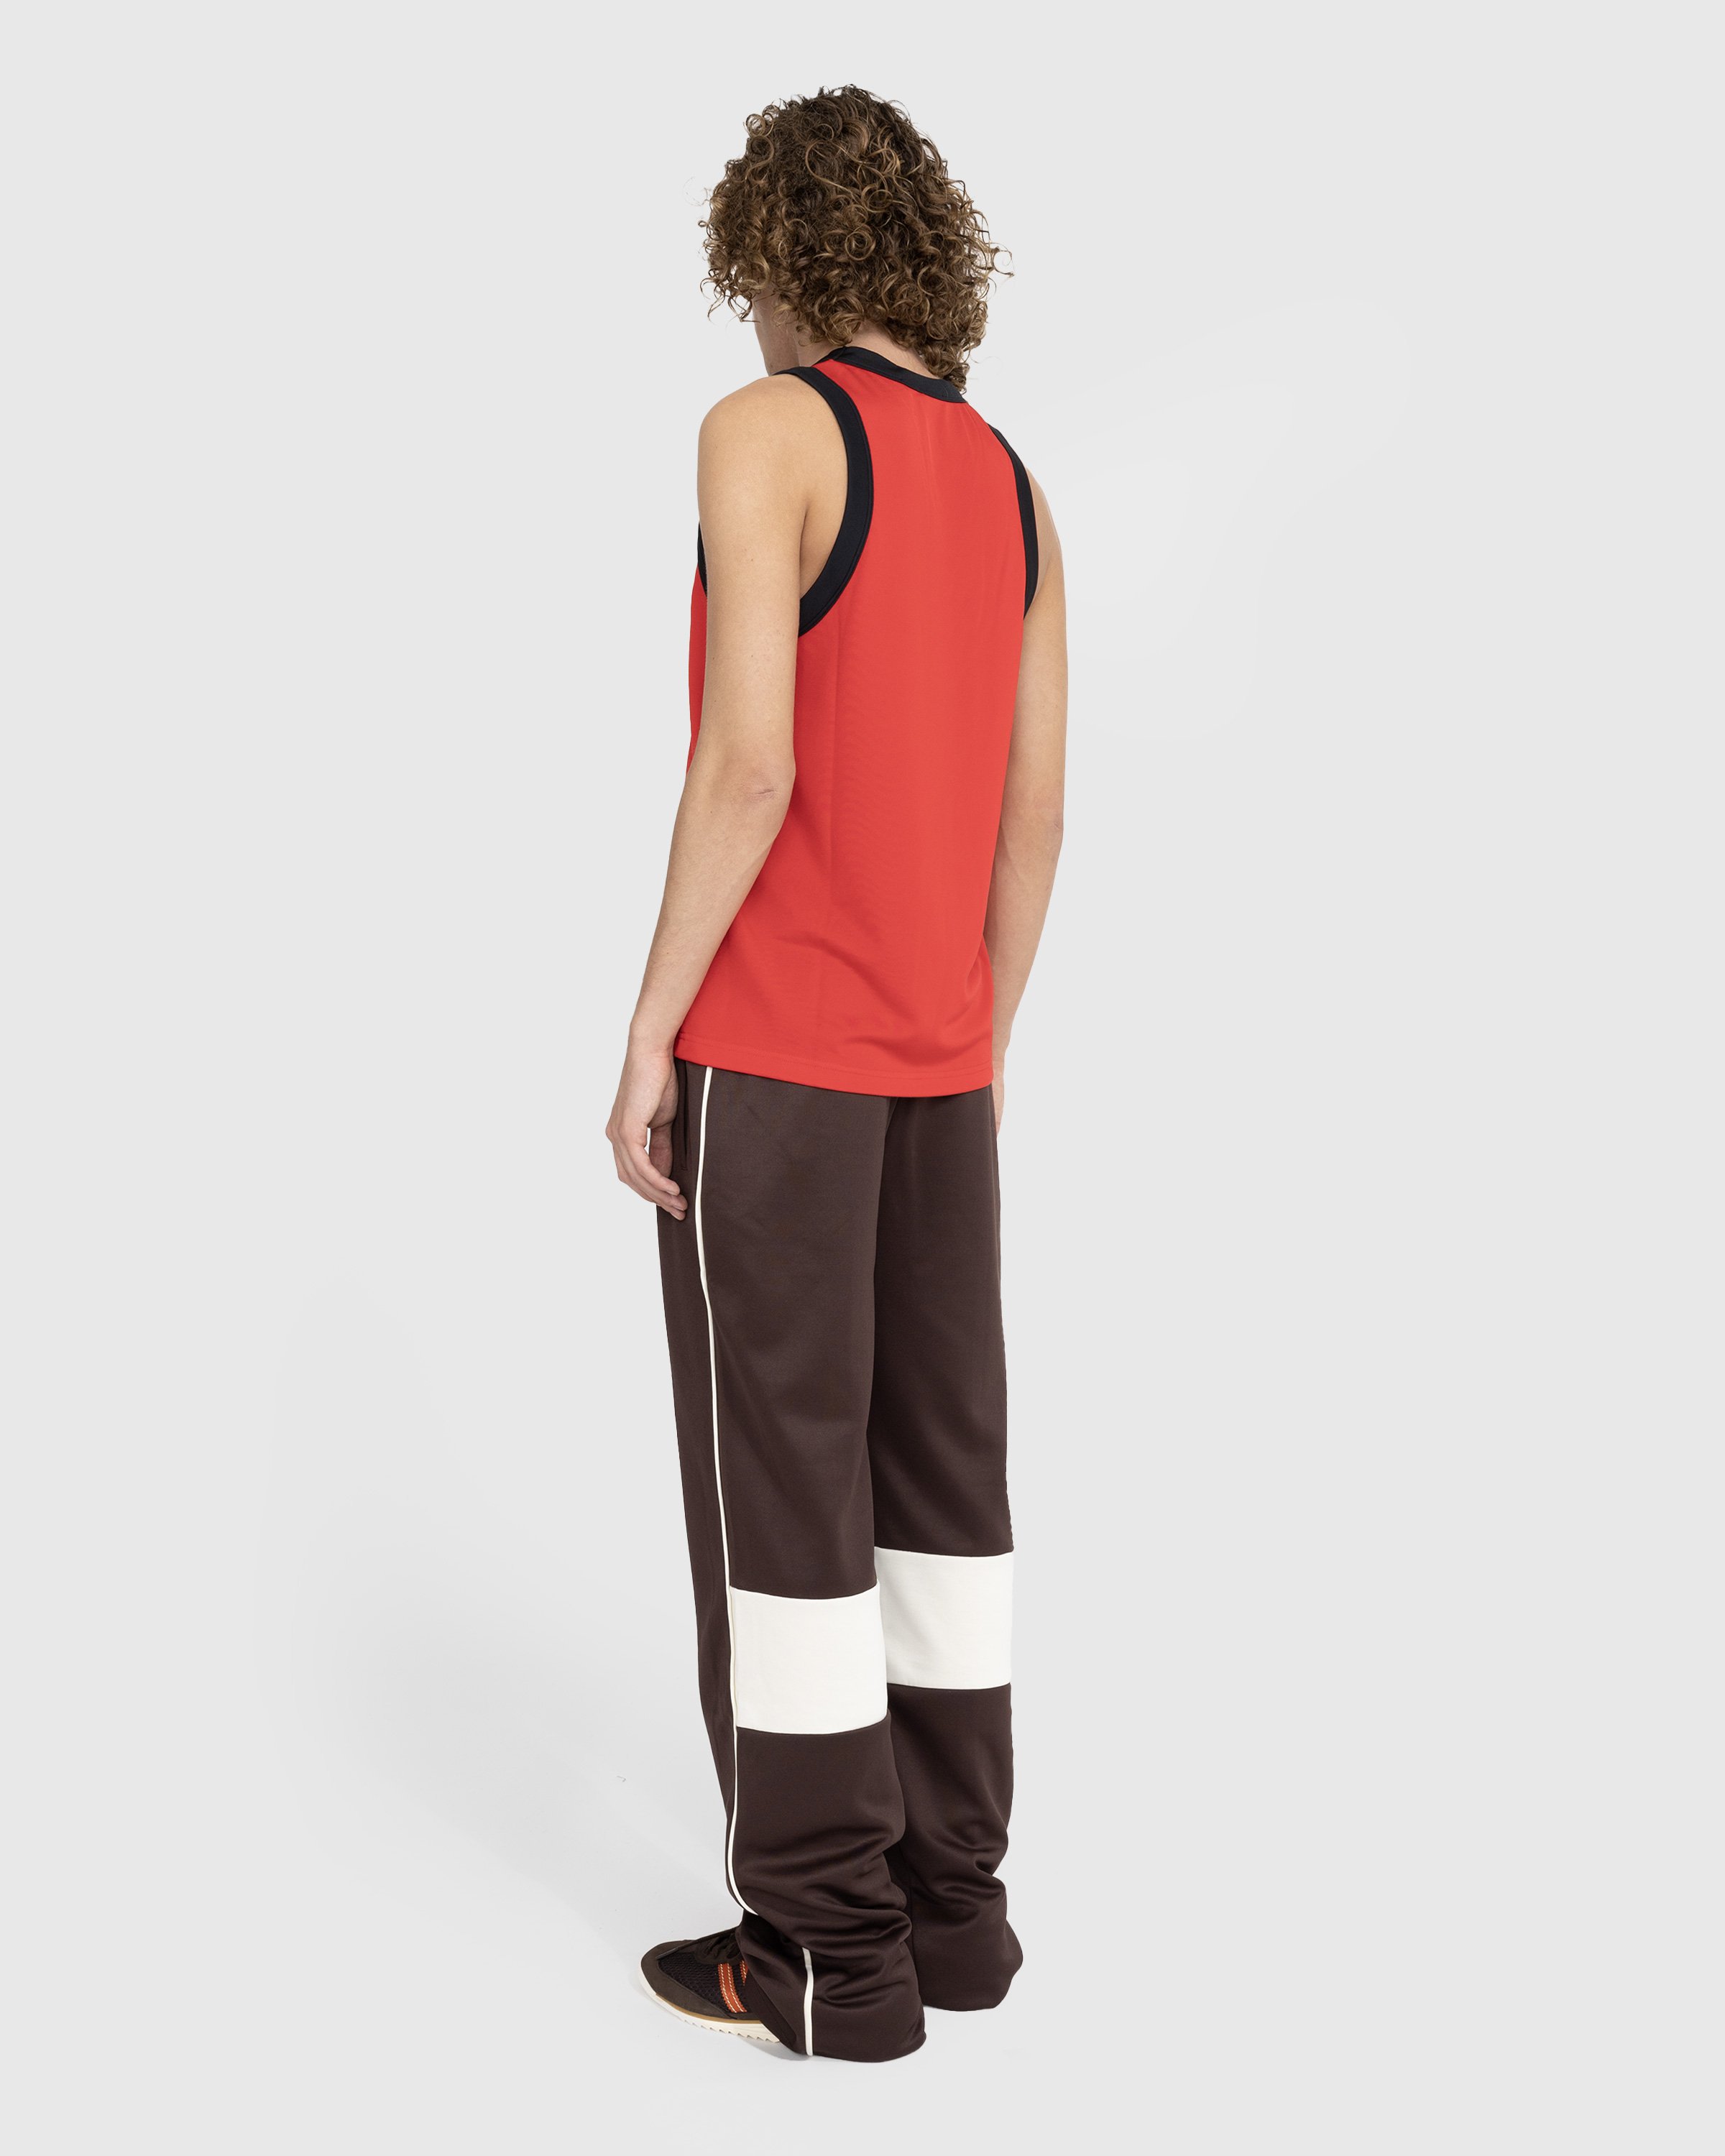 Wales Bonner - Diop Tank Top Red/Black - Clothing - Red - Image 4